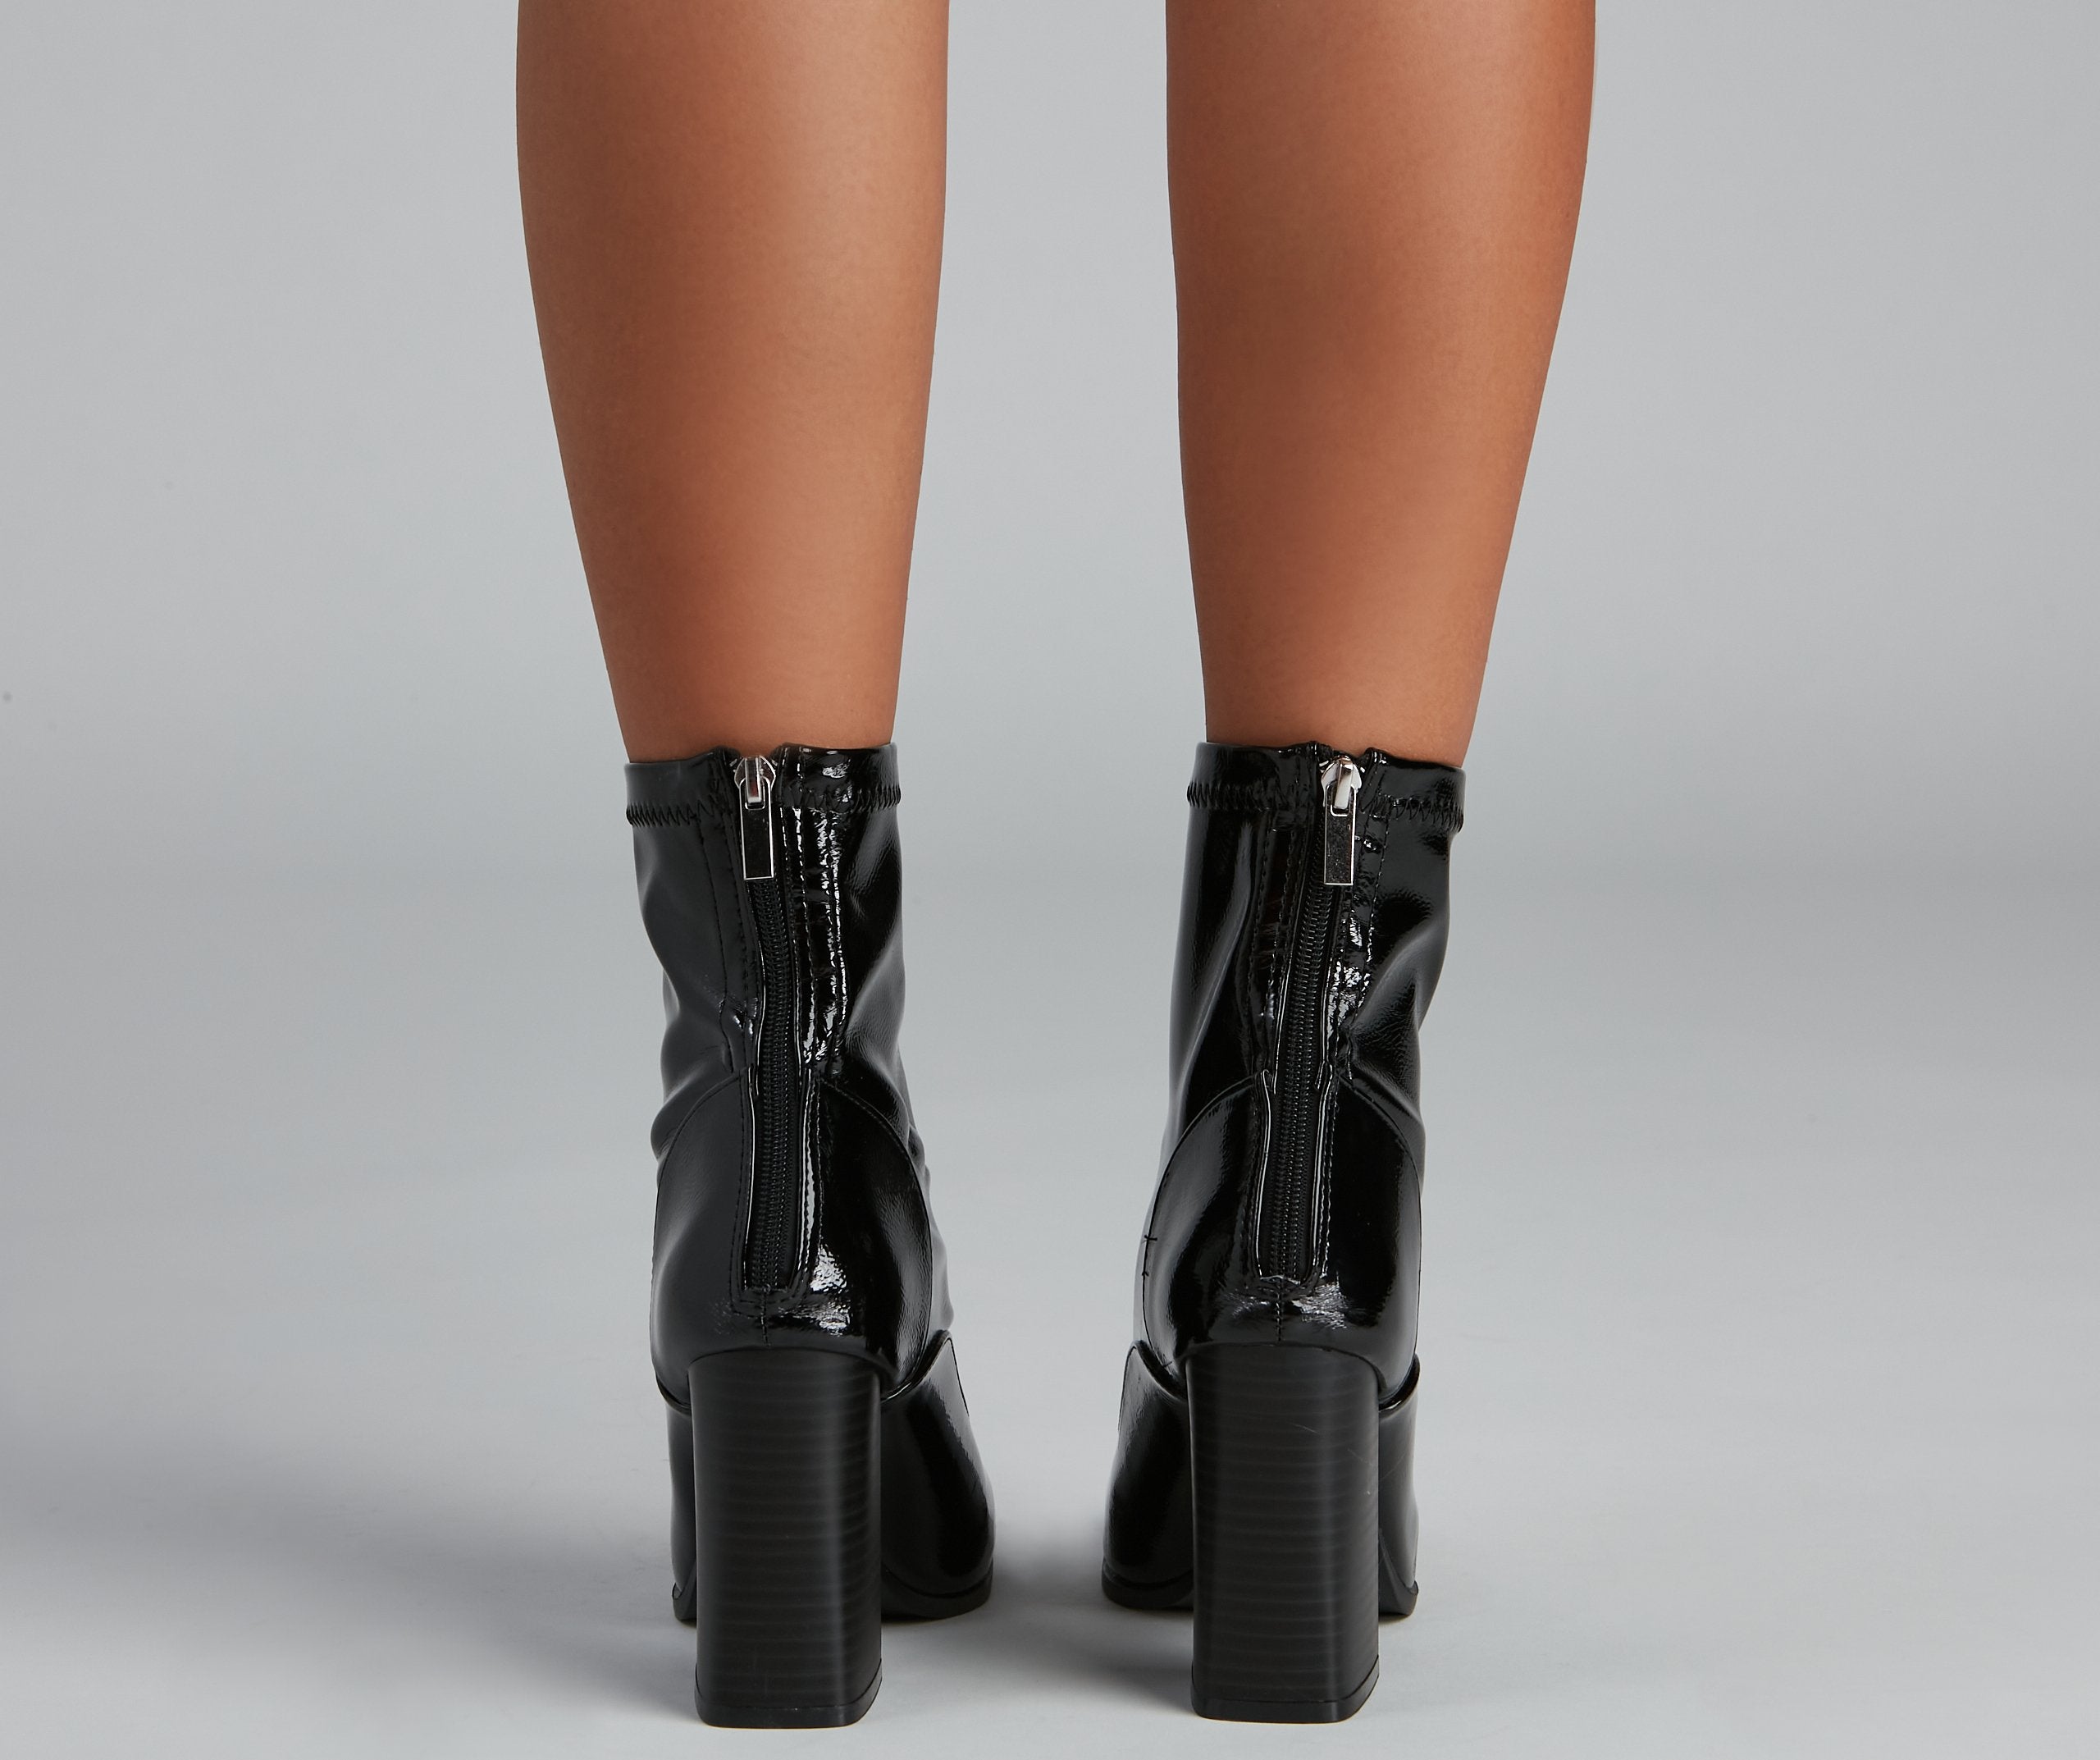 Edgy Chick Patent Leather Booties